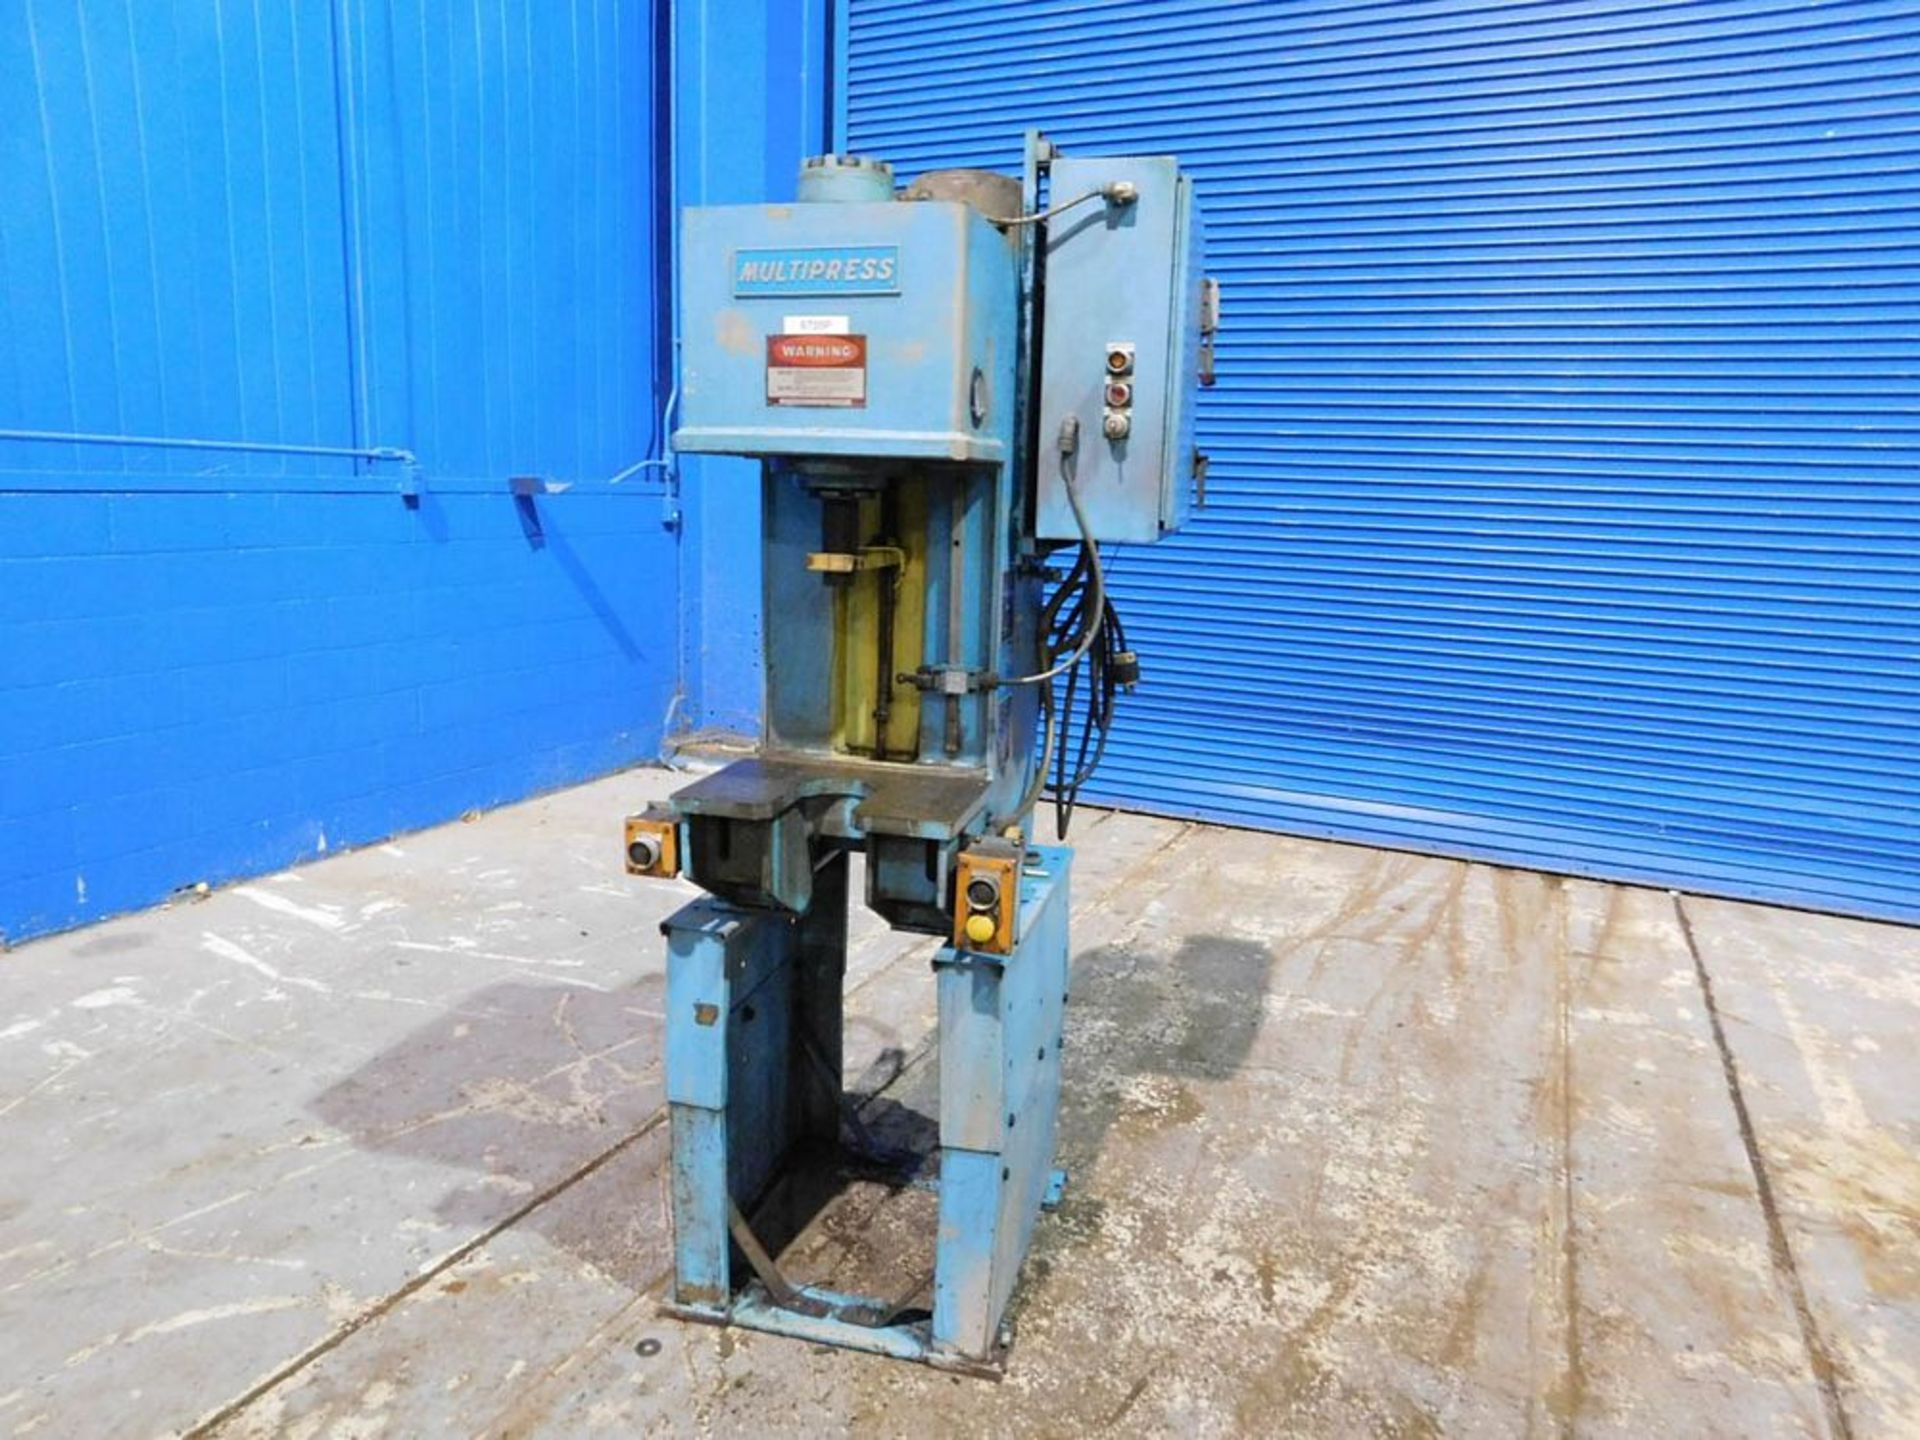 Denison Multipress Hydraulic C Frame Press 6 Ton x 18'' x 11''. LOADING FEE FOR THIS LOT: $150 - Image 9 of 9